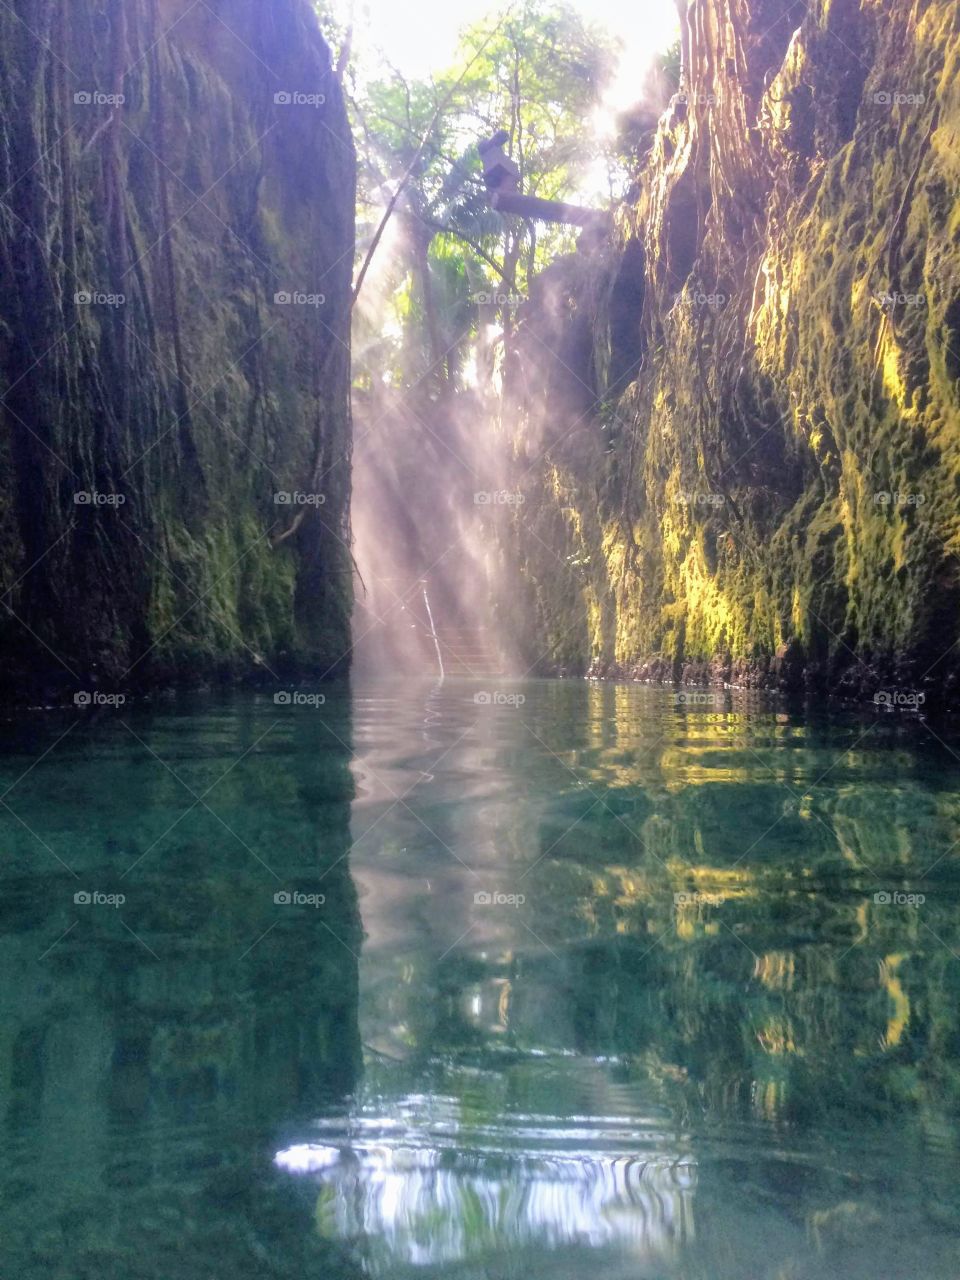 A natural cenote river running througn mexico